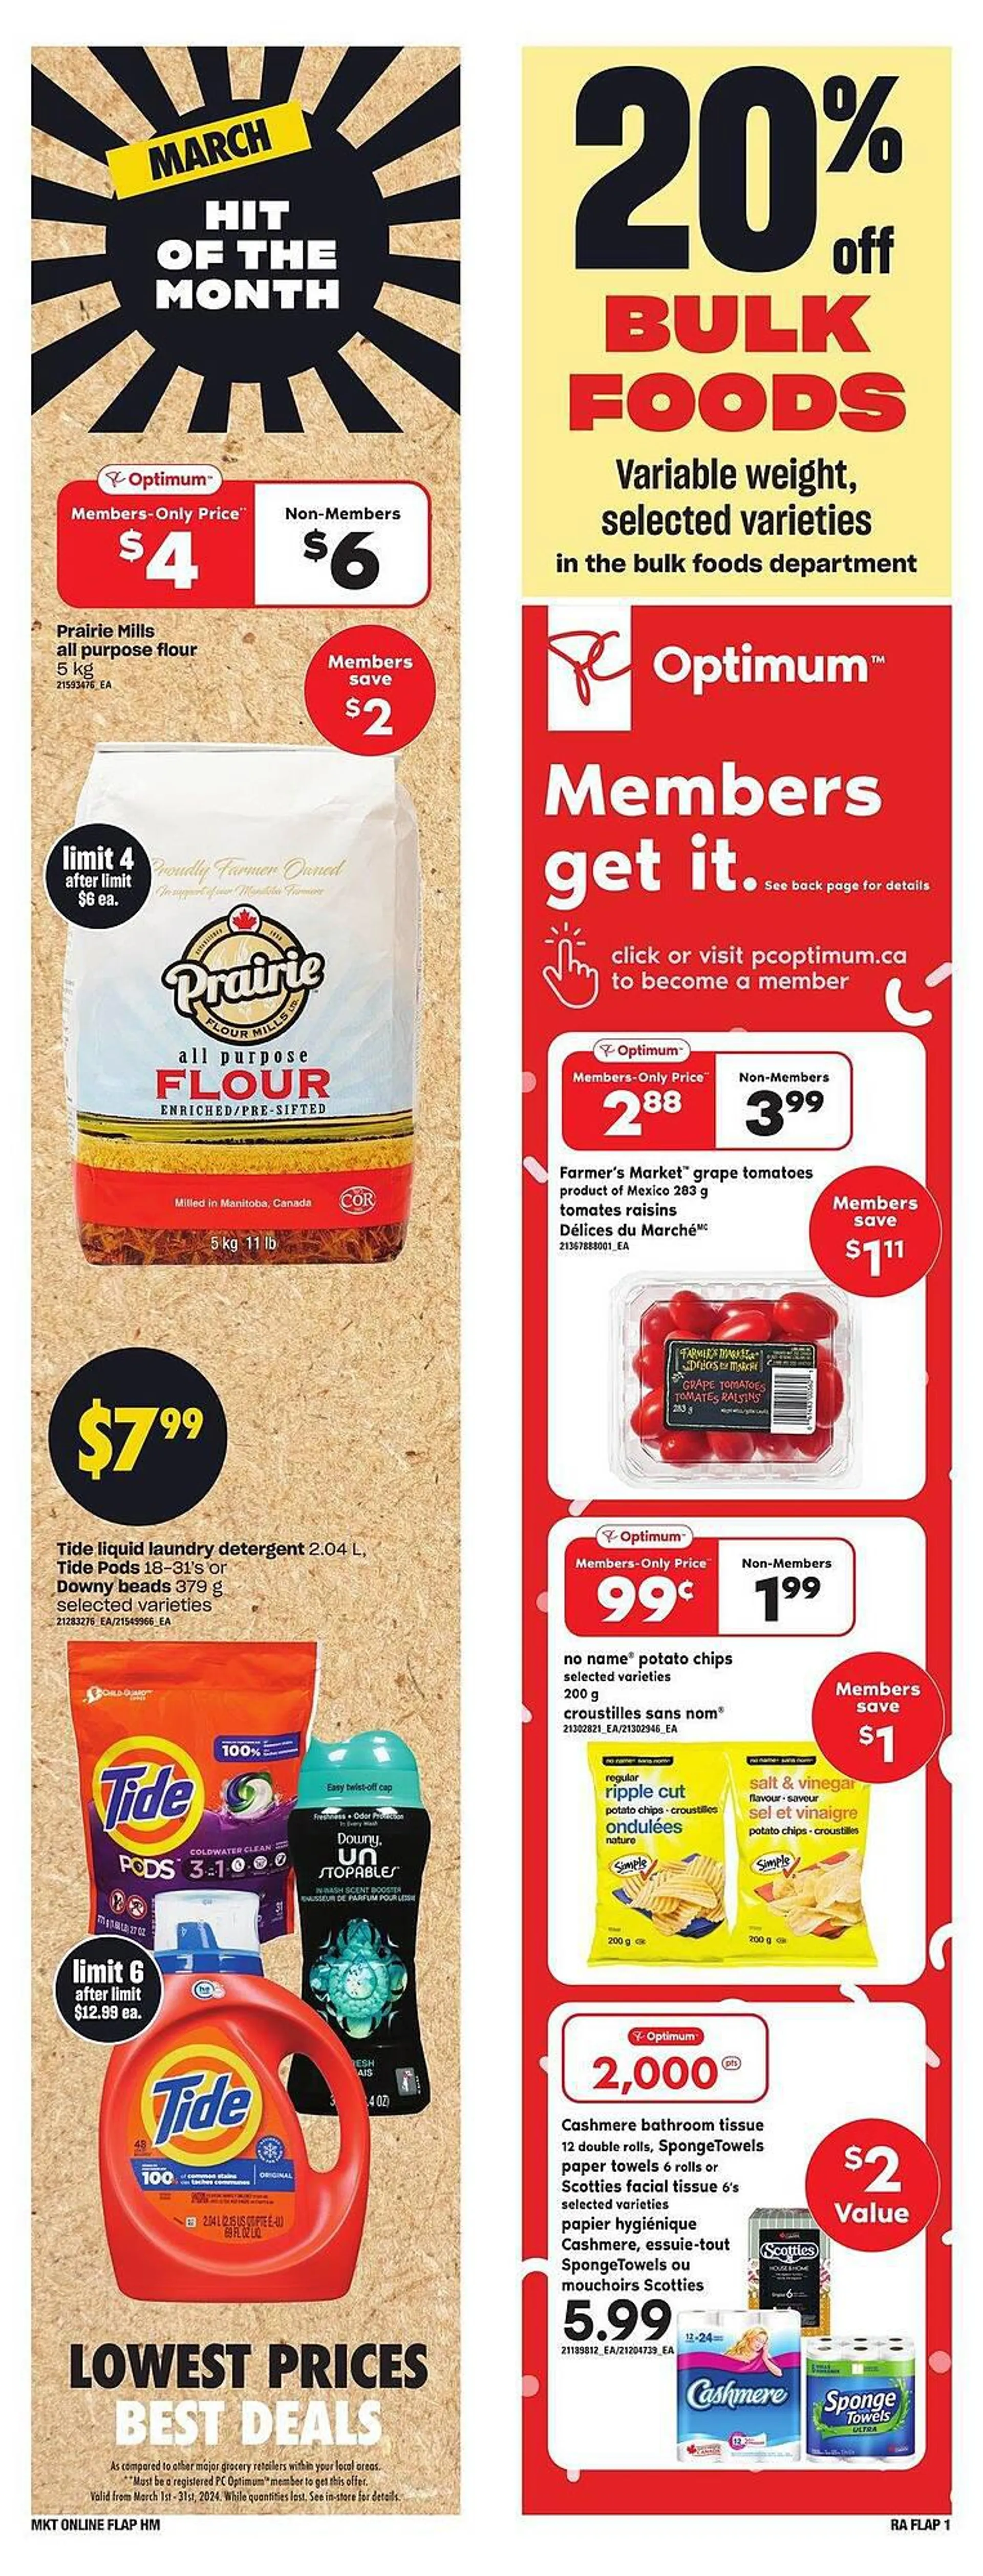 Atlantic Superstore flyer from March 7 to April 3 2024 - flyer page 1